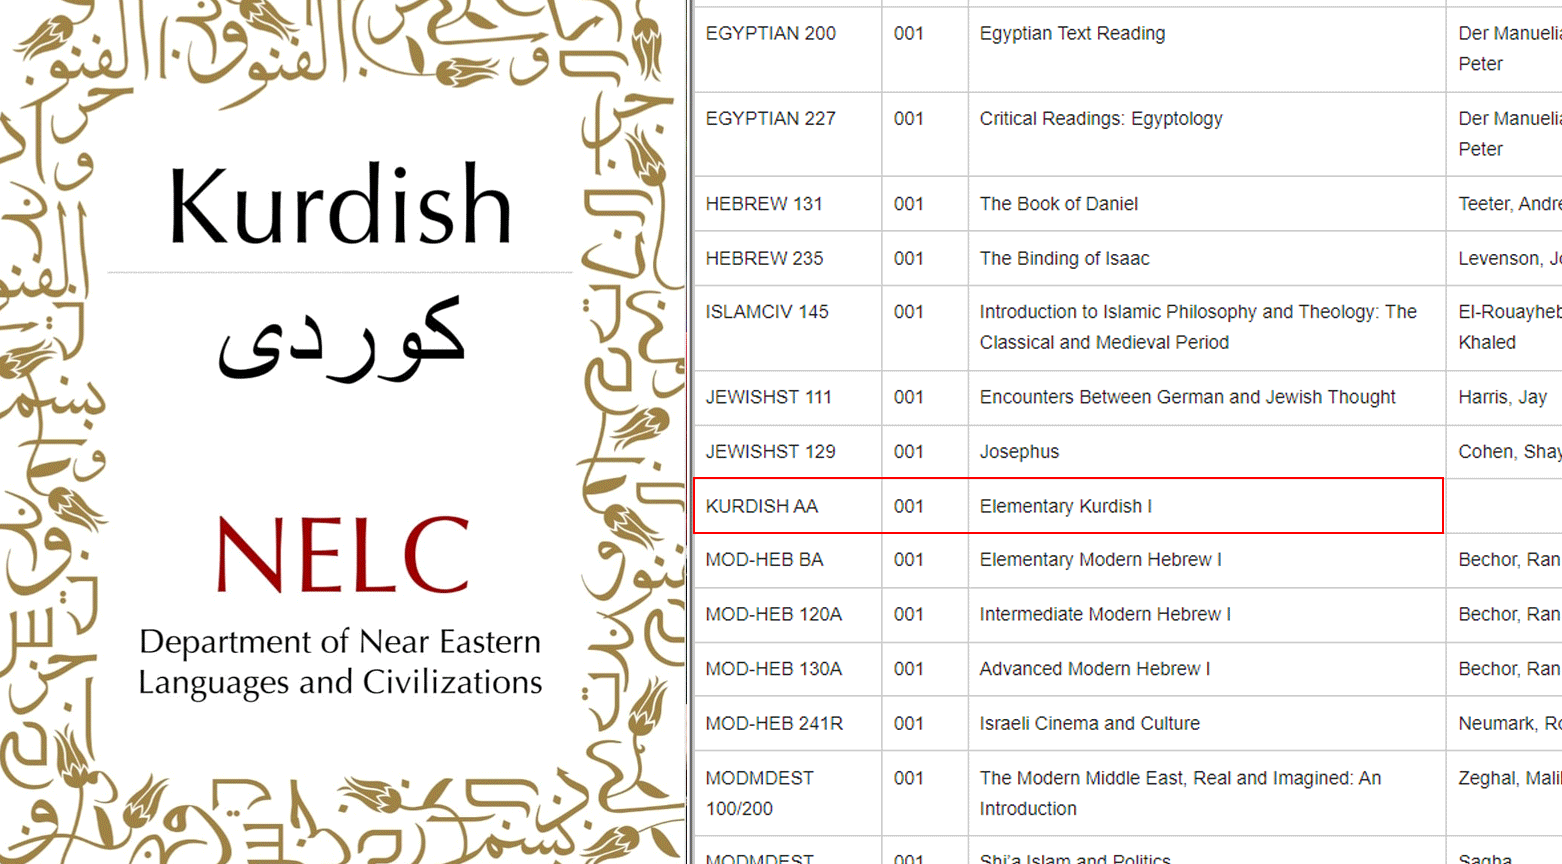 A course catalog for Harvard University displaying Elementary Kurdish as an available course. (Photo: Designed by Kurdistan 24)